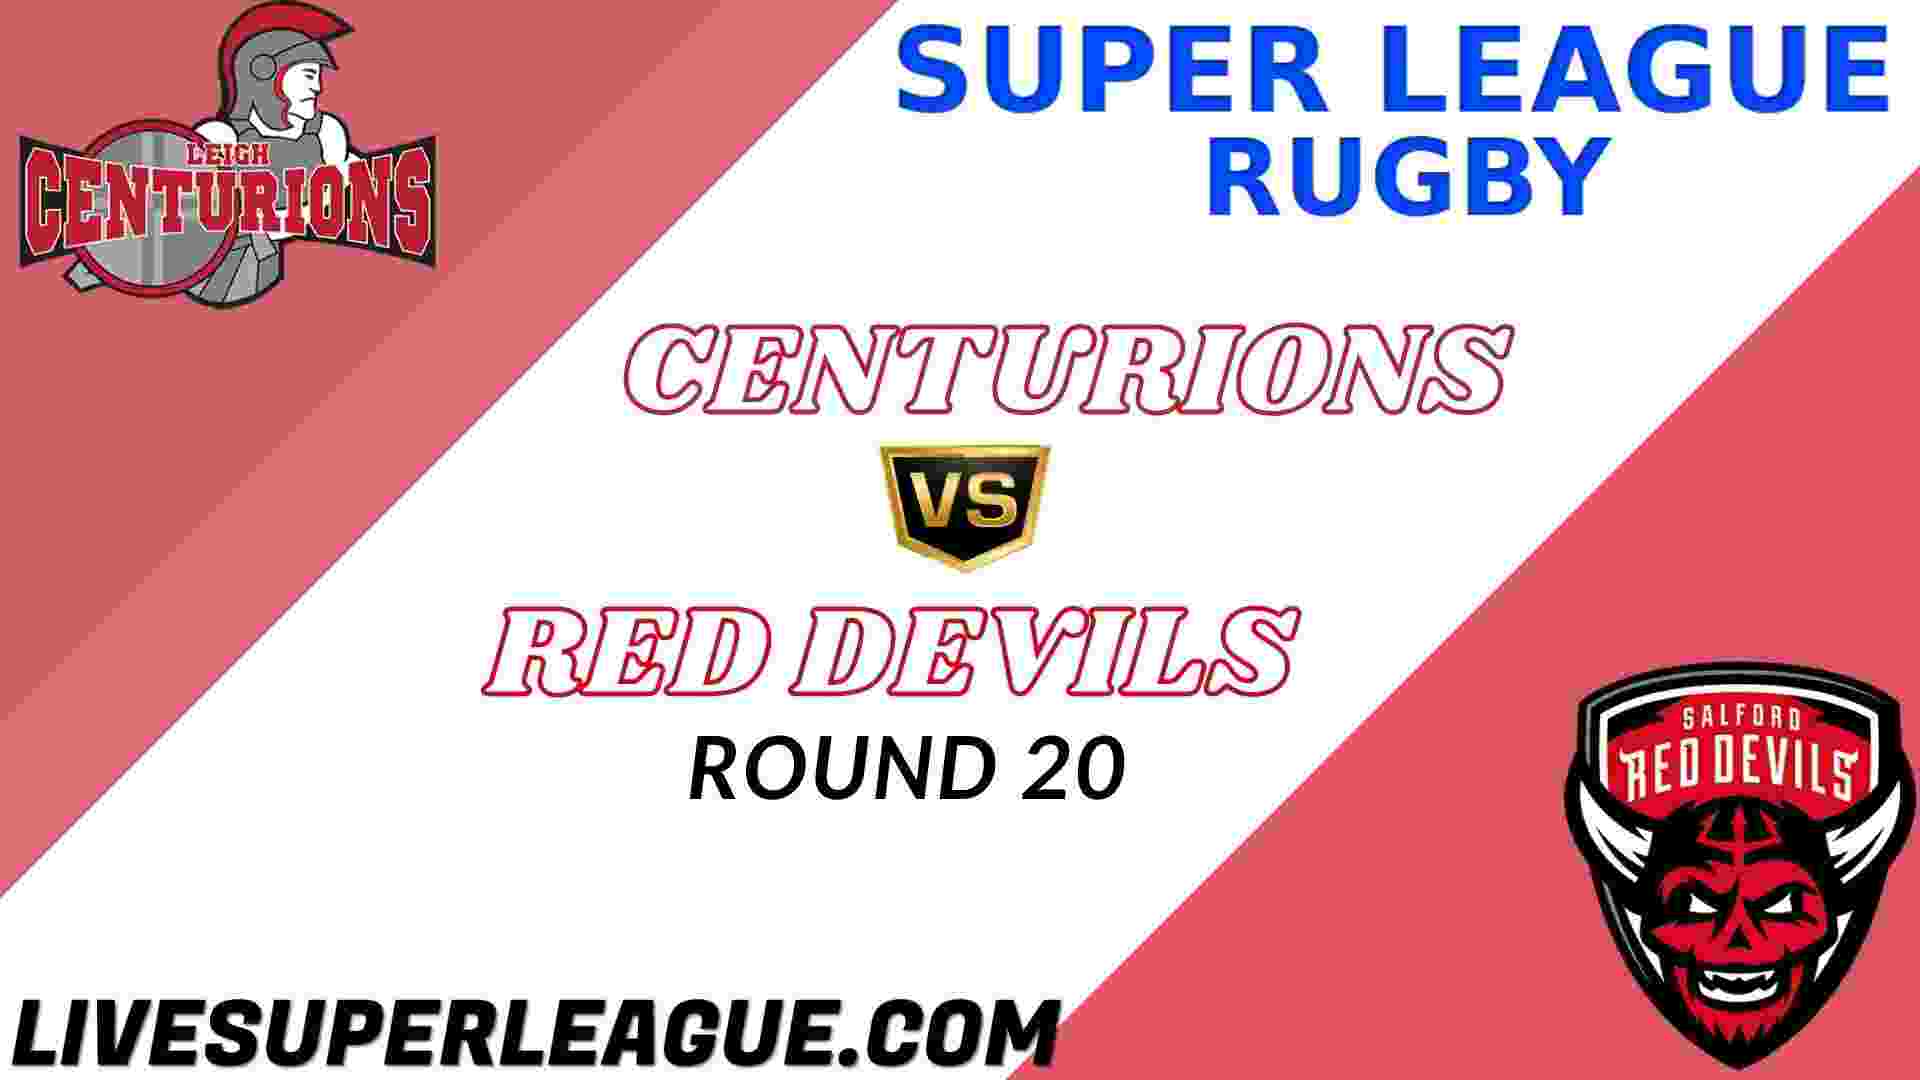 Live Leigh Centurions VS Salford Red Devils Coverage